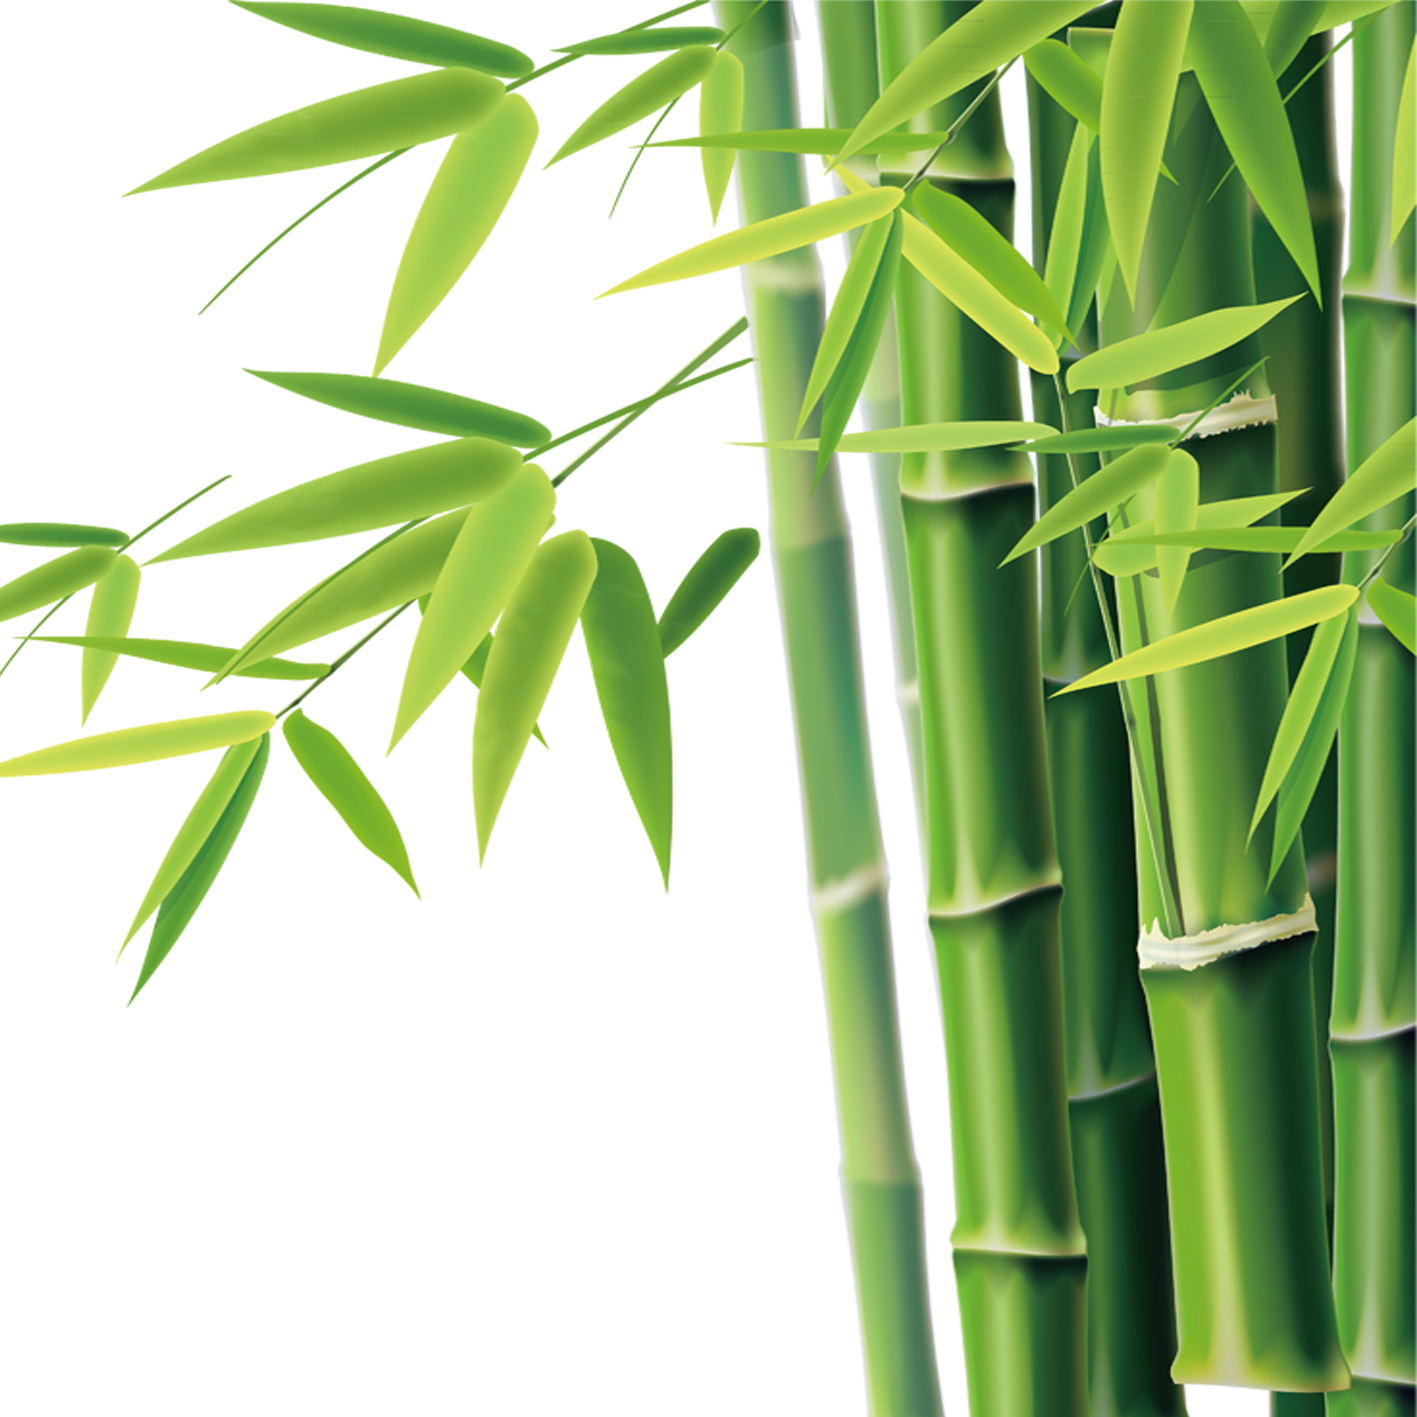 Bamboo PNG images Download